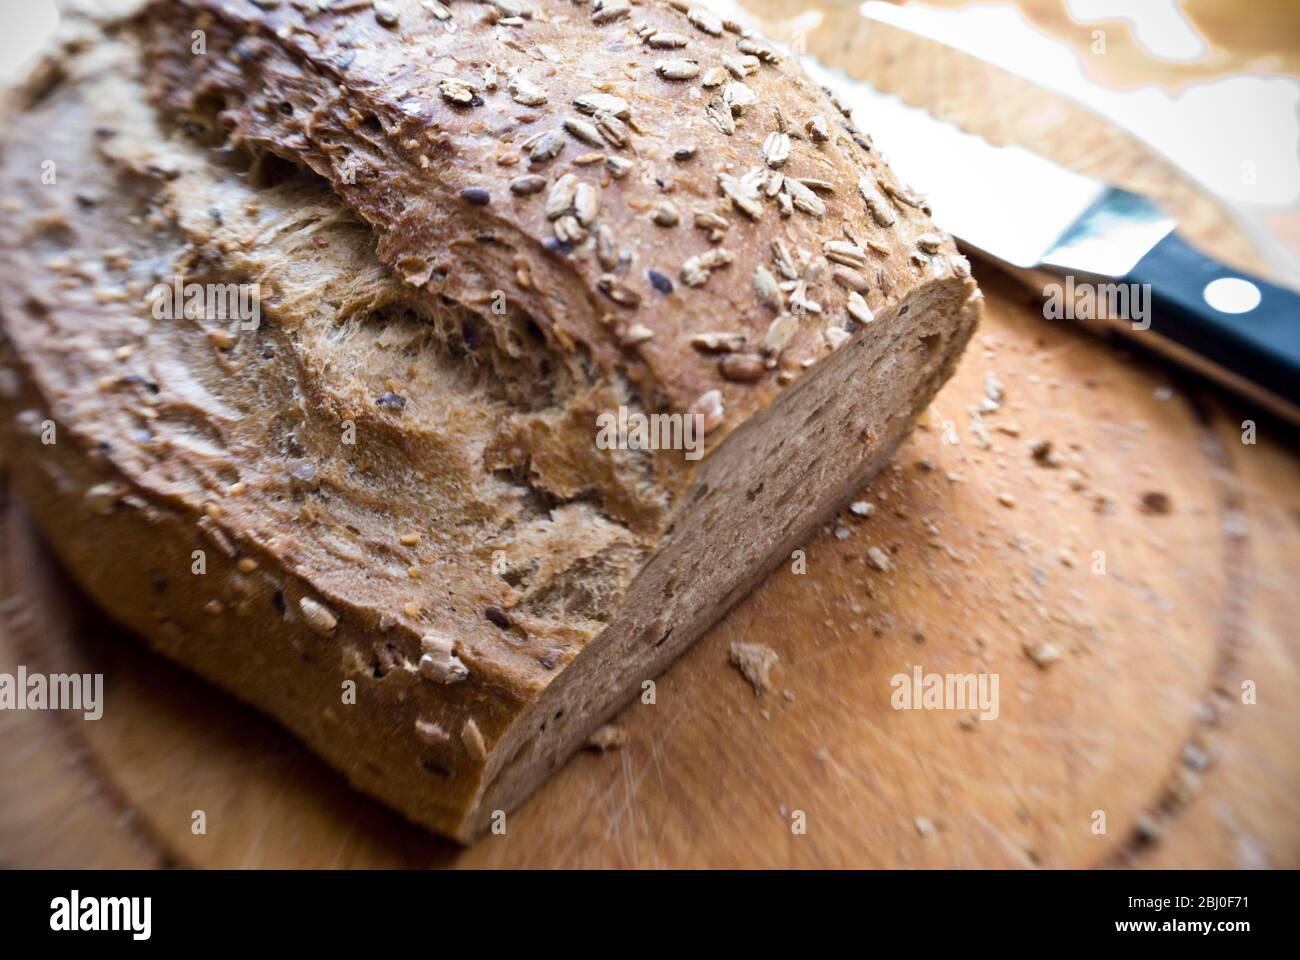 Slicing a wholegrain, rye and walnut loaf on old wooden board. - Stock Photo